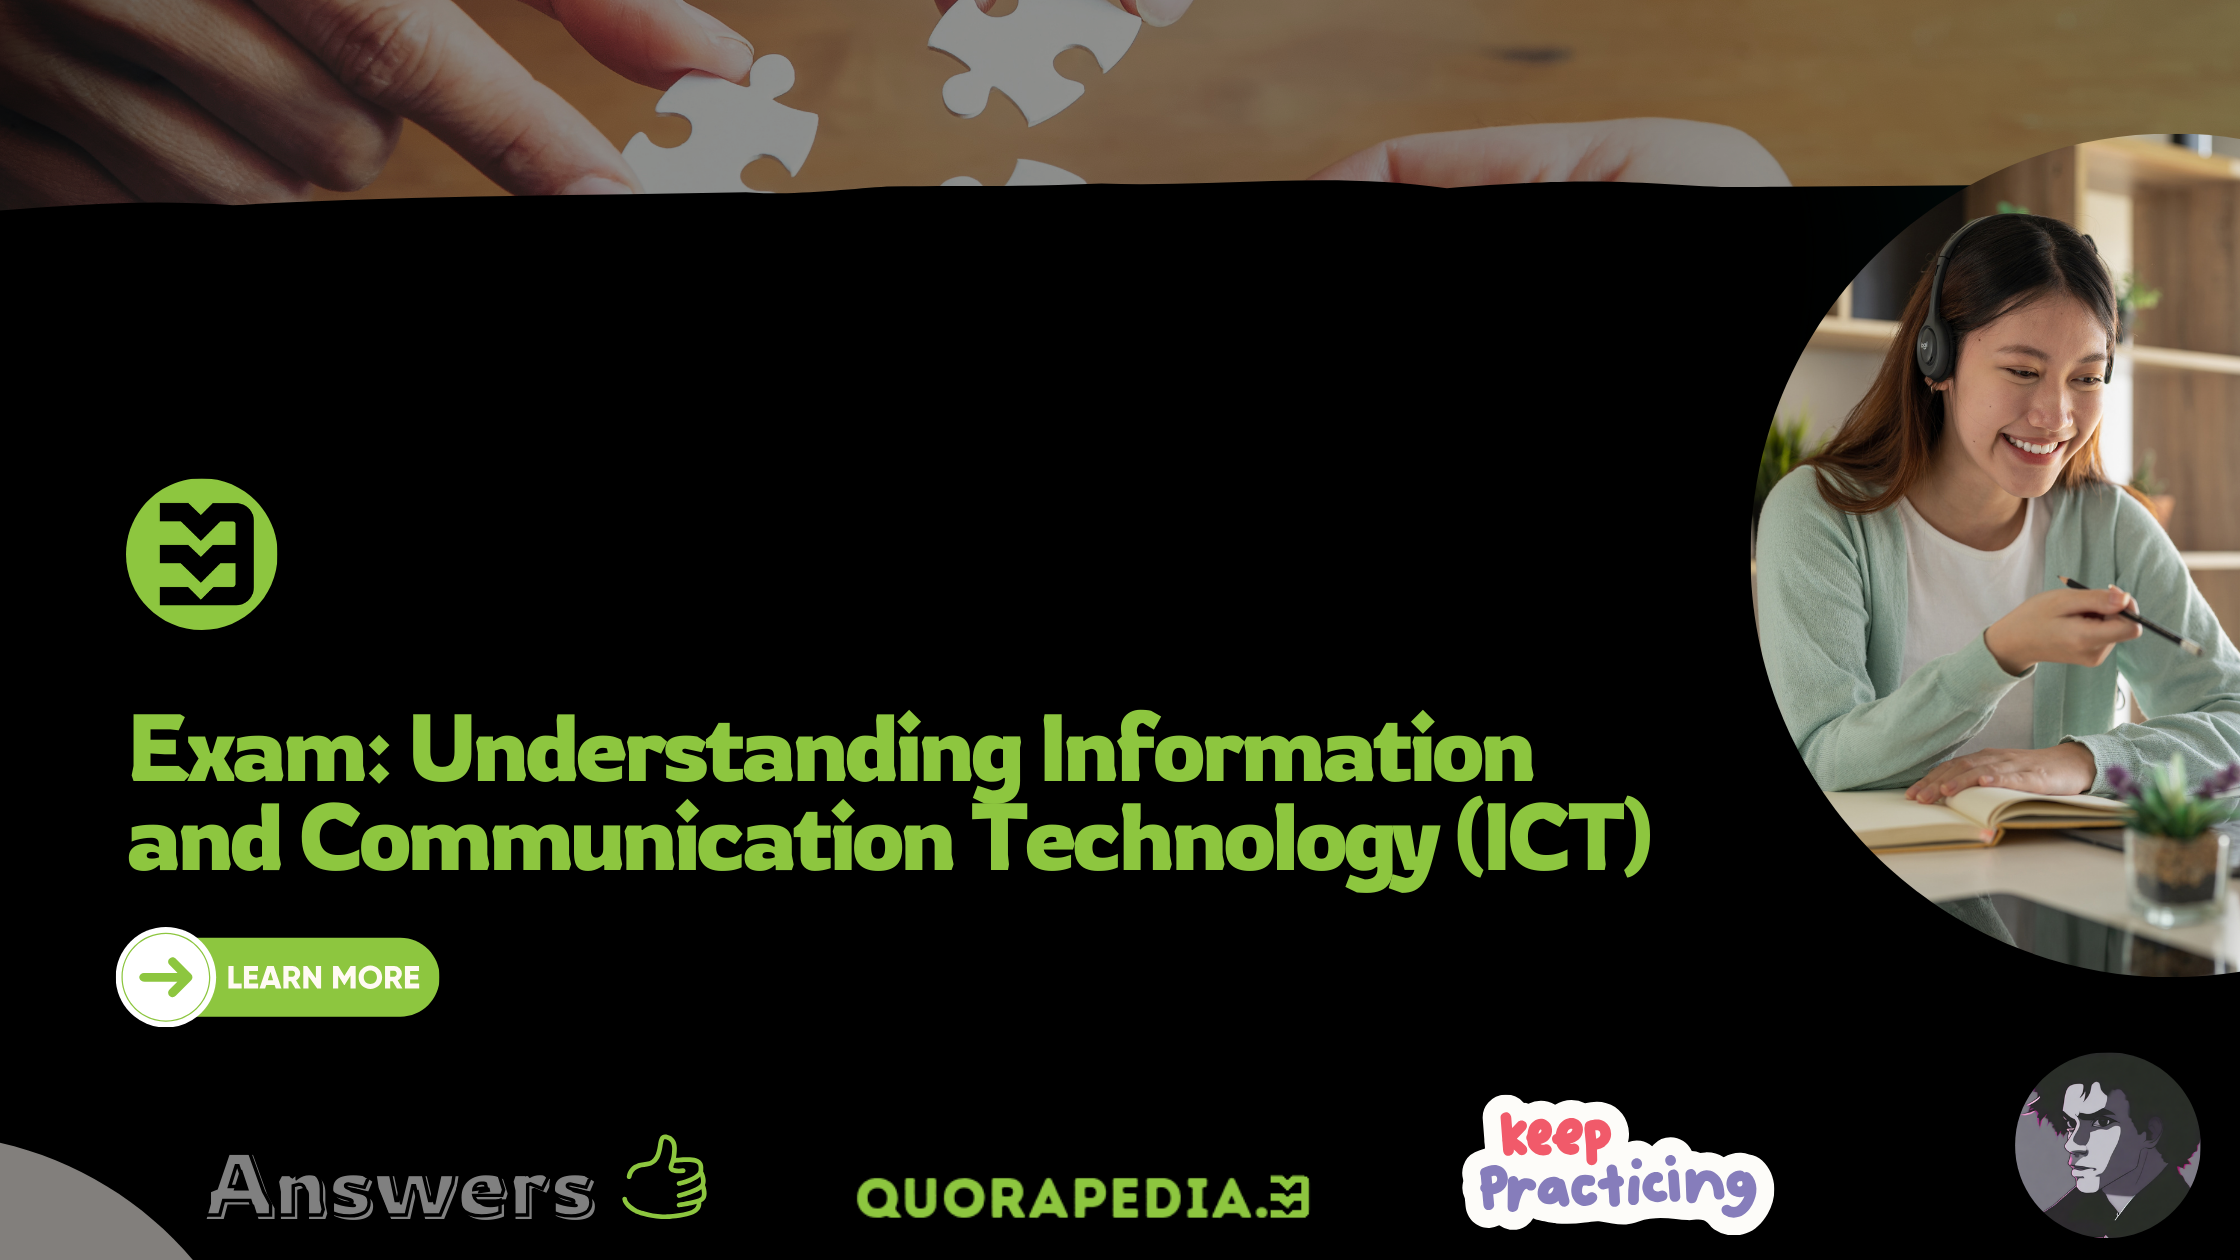 Exam: Understanding Information and Communication Technology (ICT)